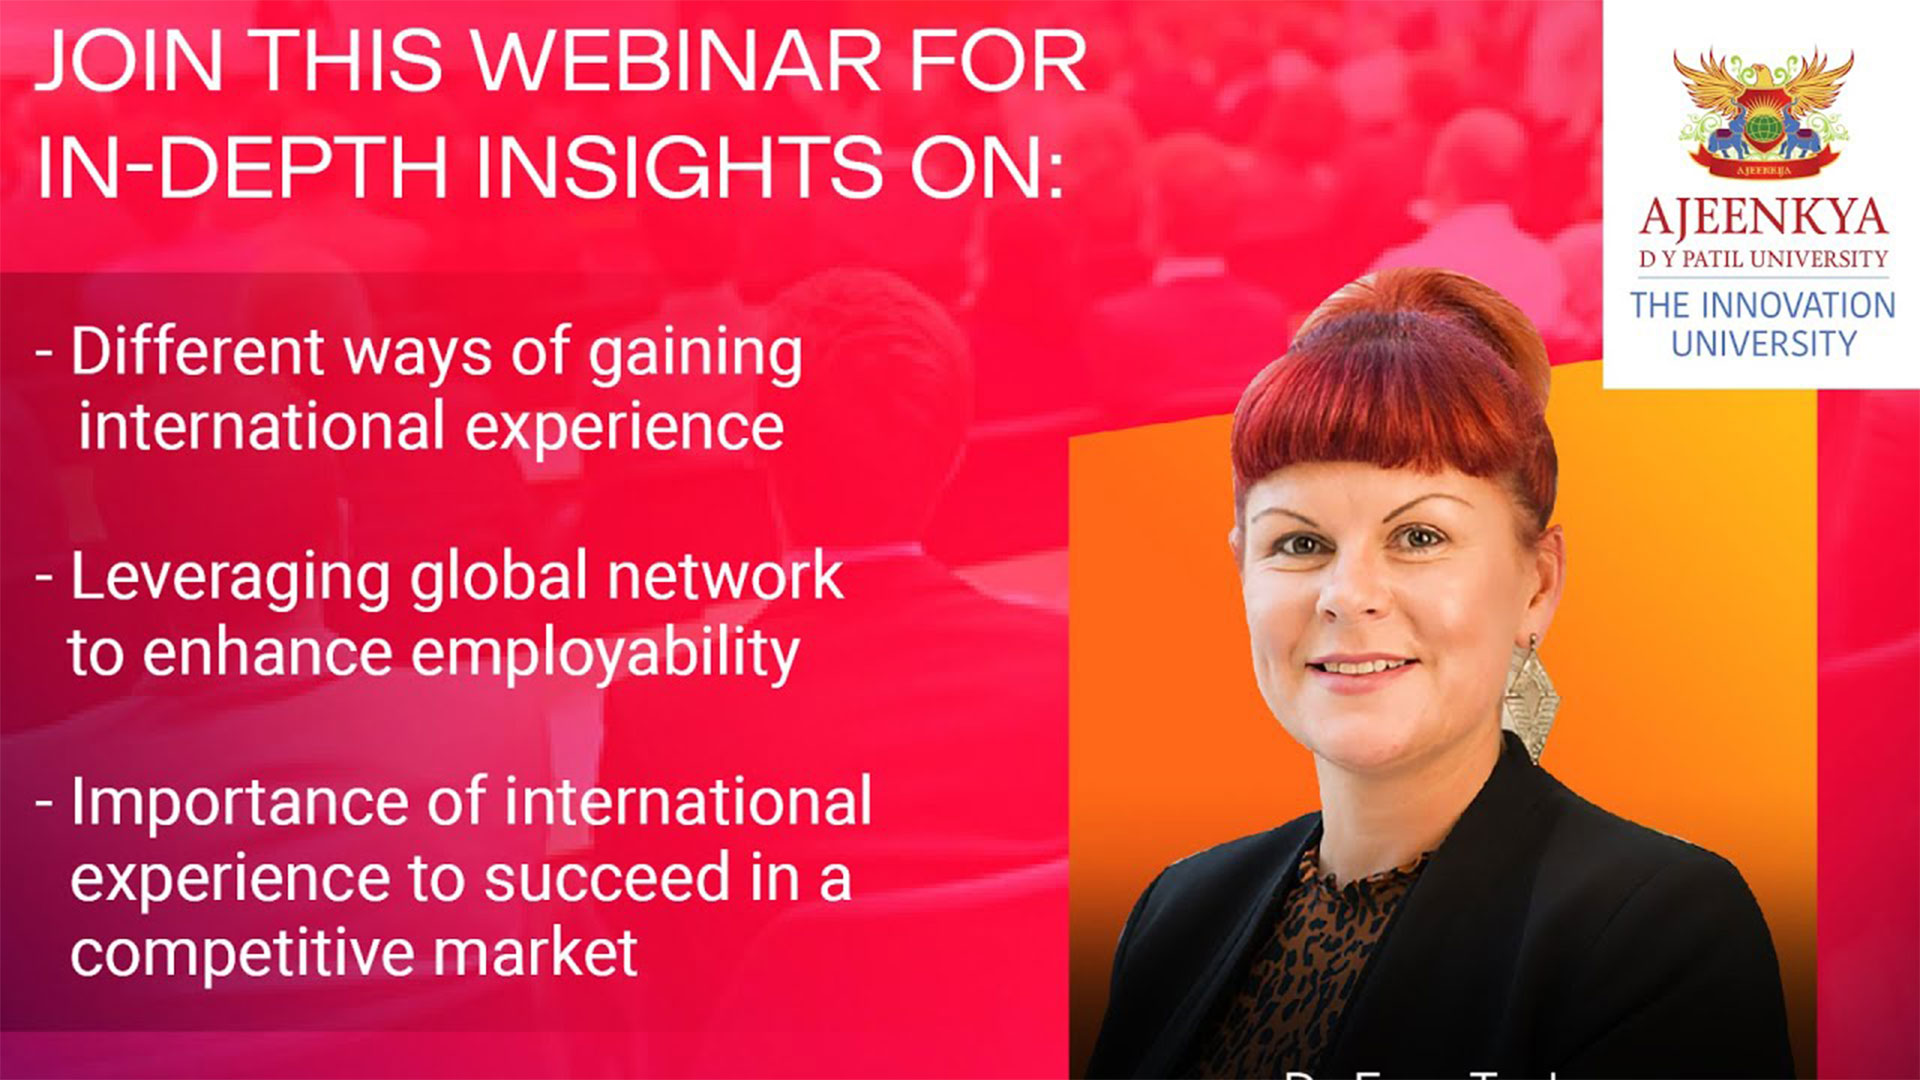 Benefits of International Experience in your career by Dr. Faye Taylor #ADYPU #webinar #MBA